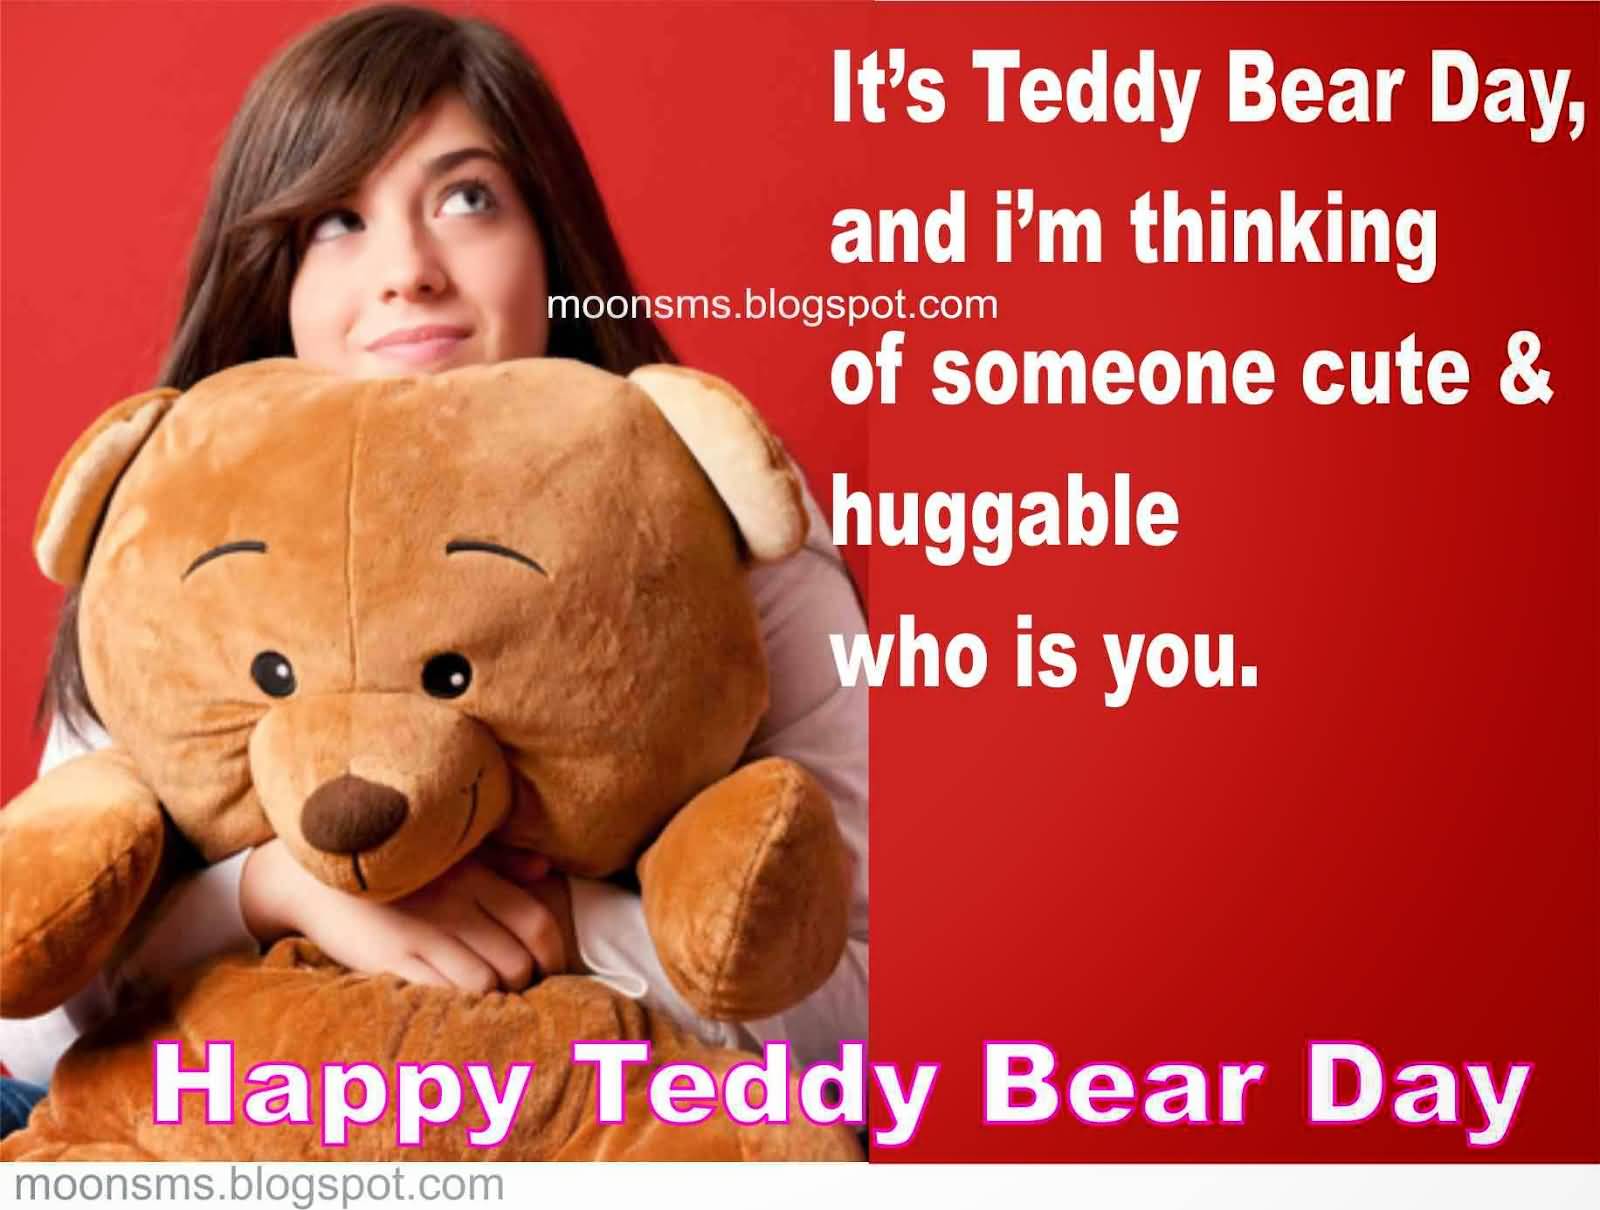 It’s Teddy Bear Day, And I’m Thinking Of Someone Cute Of Huggable Who Is You. Happy Teddy Bear Day